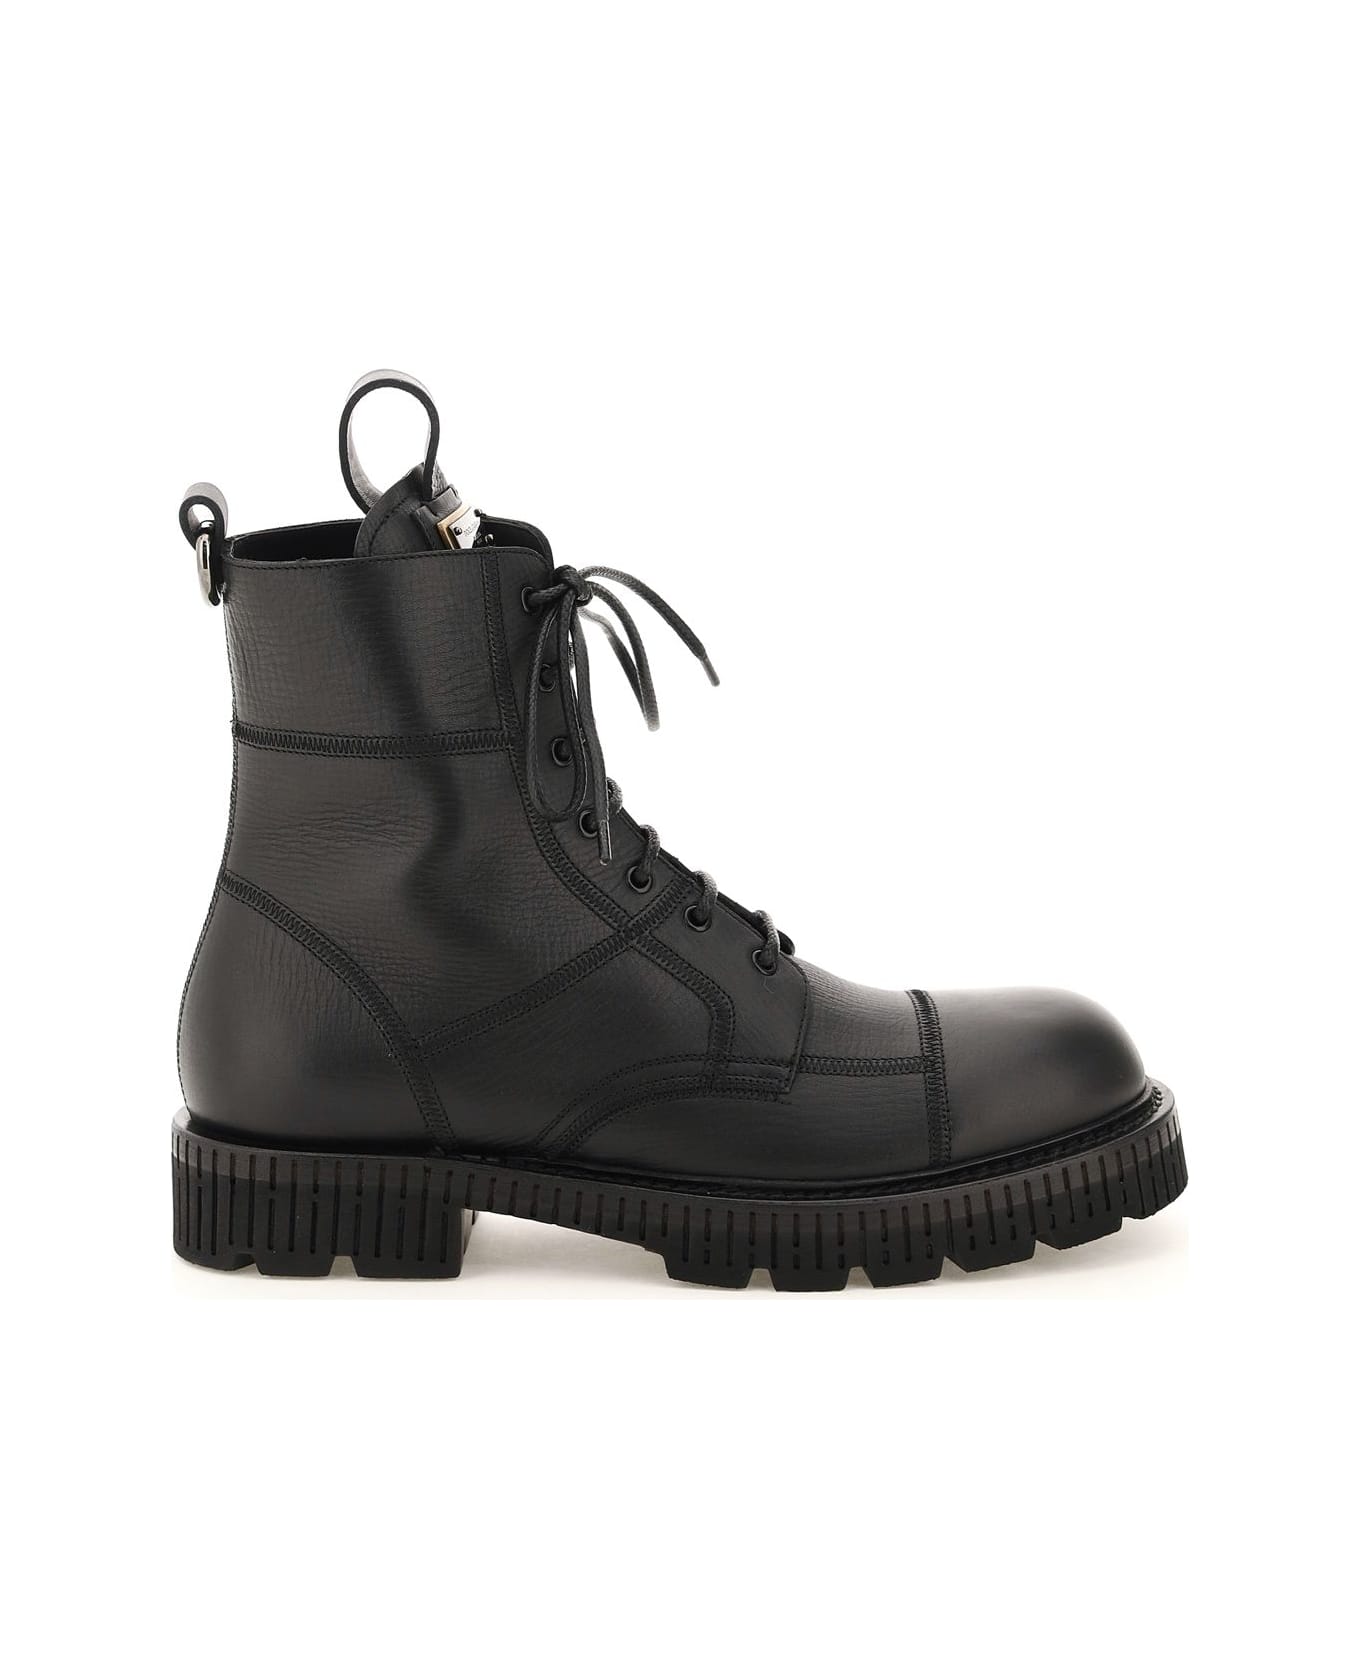 Dolce & Gabbana Leather Lace Up Boots - Black